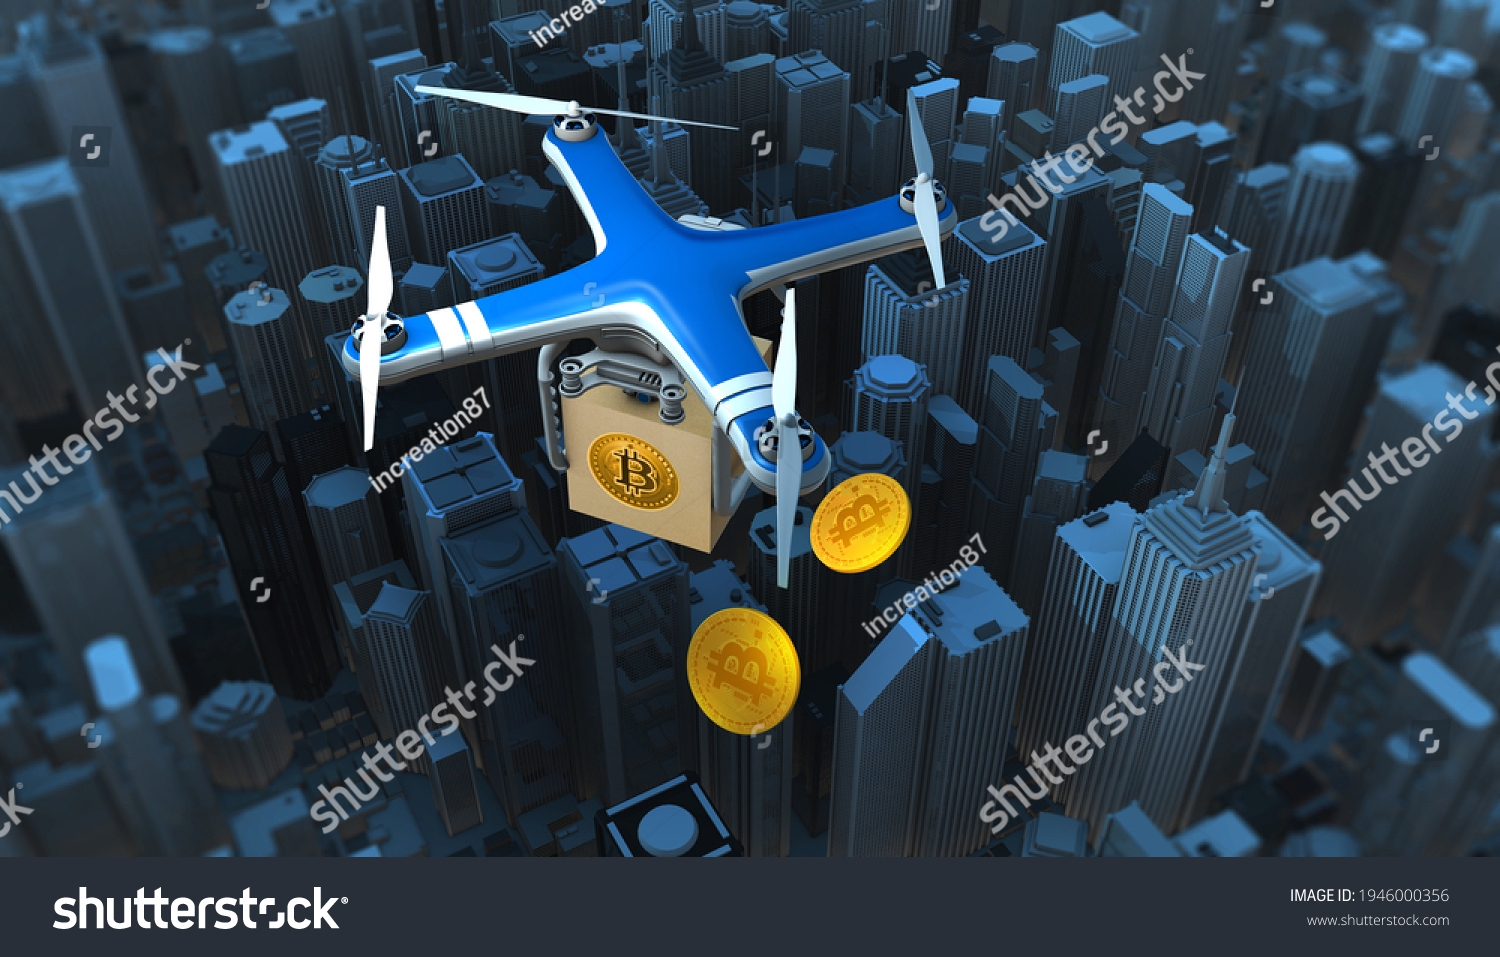 Crypto drone coins airdrop 4g memory crypto currency mode does not boot